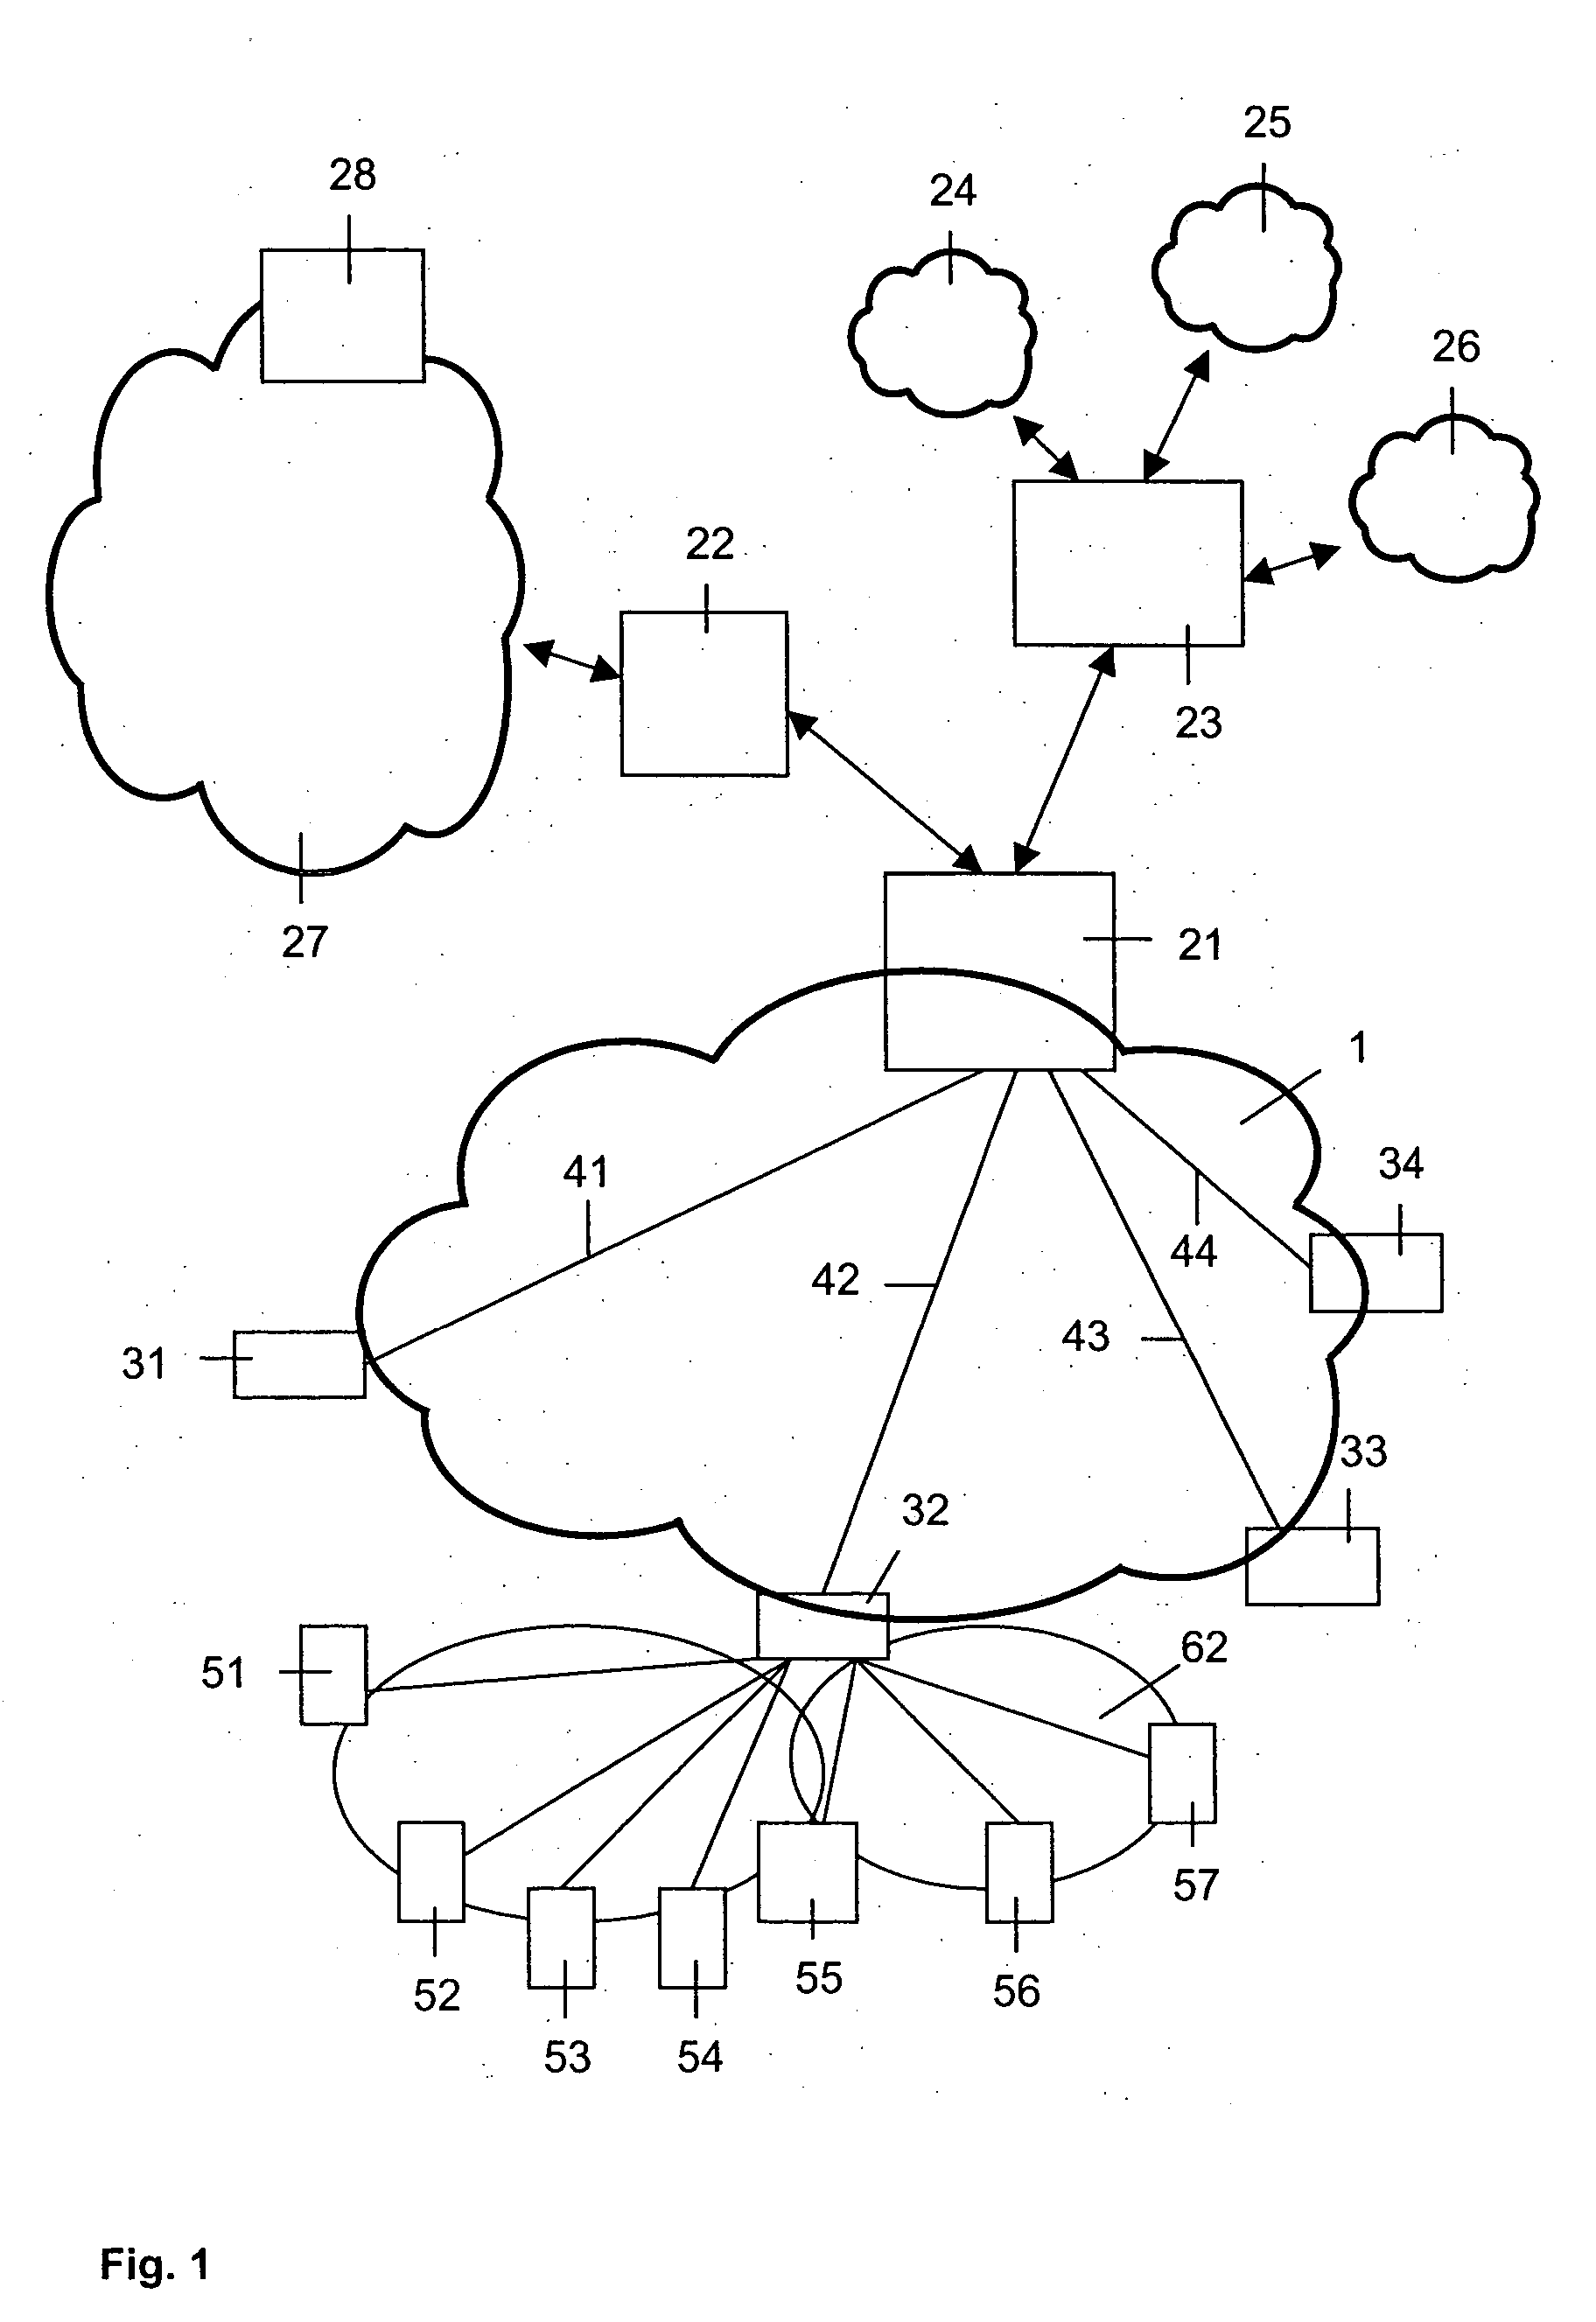 Method of providing multi-media communications over a DSL access network